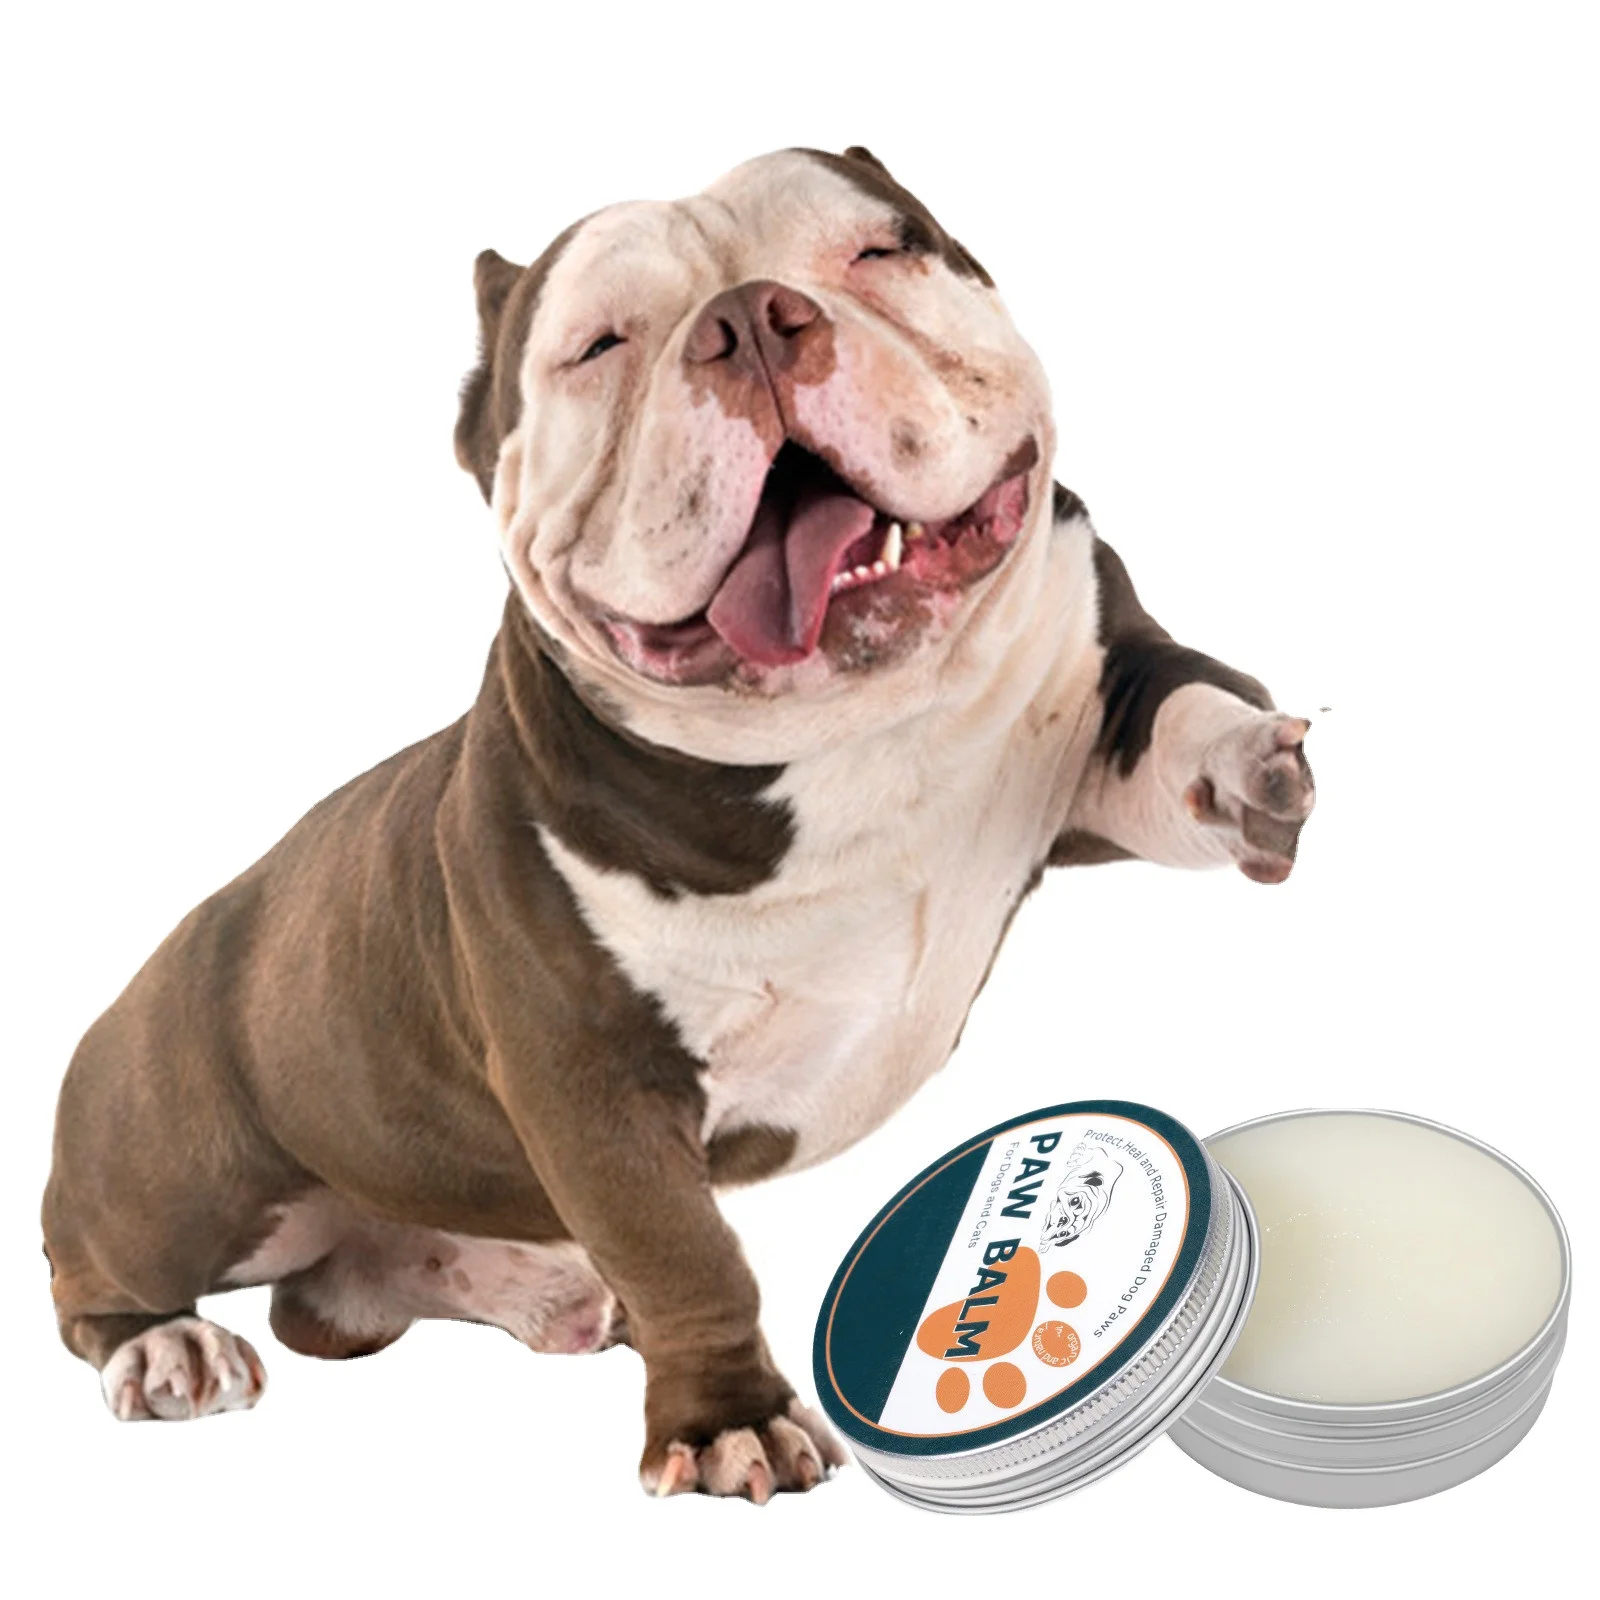 

OEM Wholesale Private Label Organic Natural Pet Care Products DogSoothing Paw Balm For Dogs